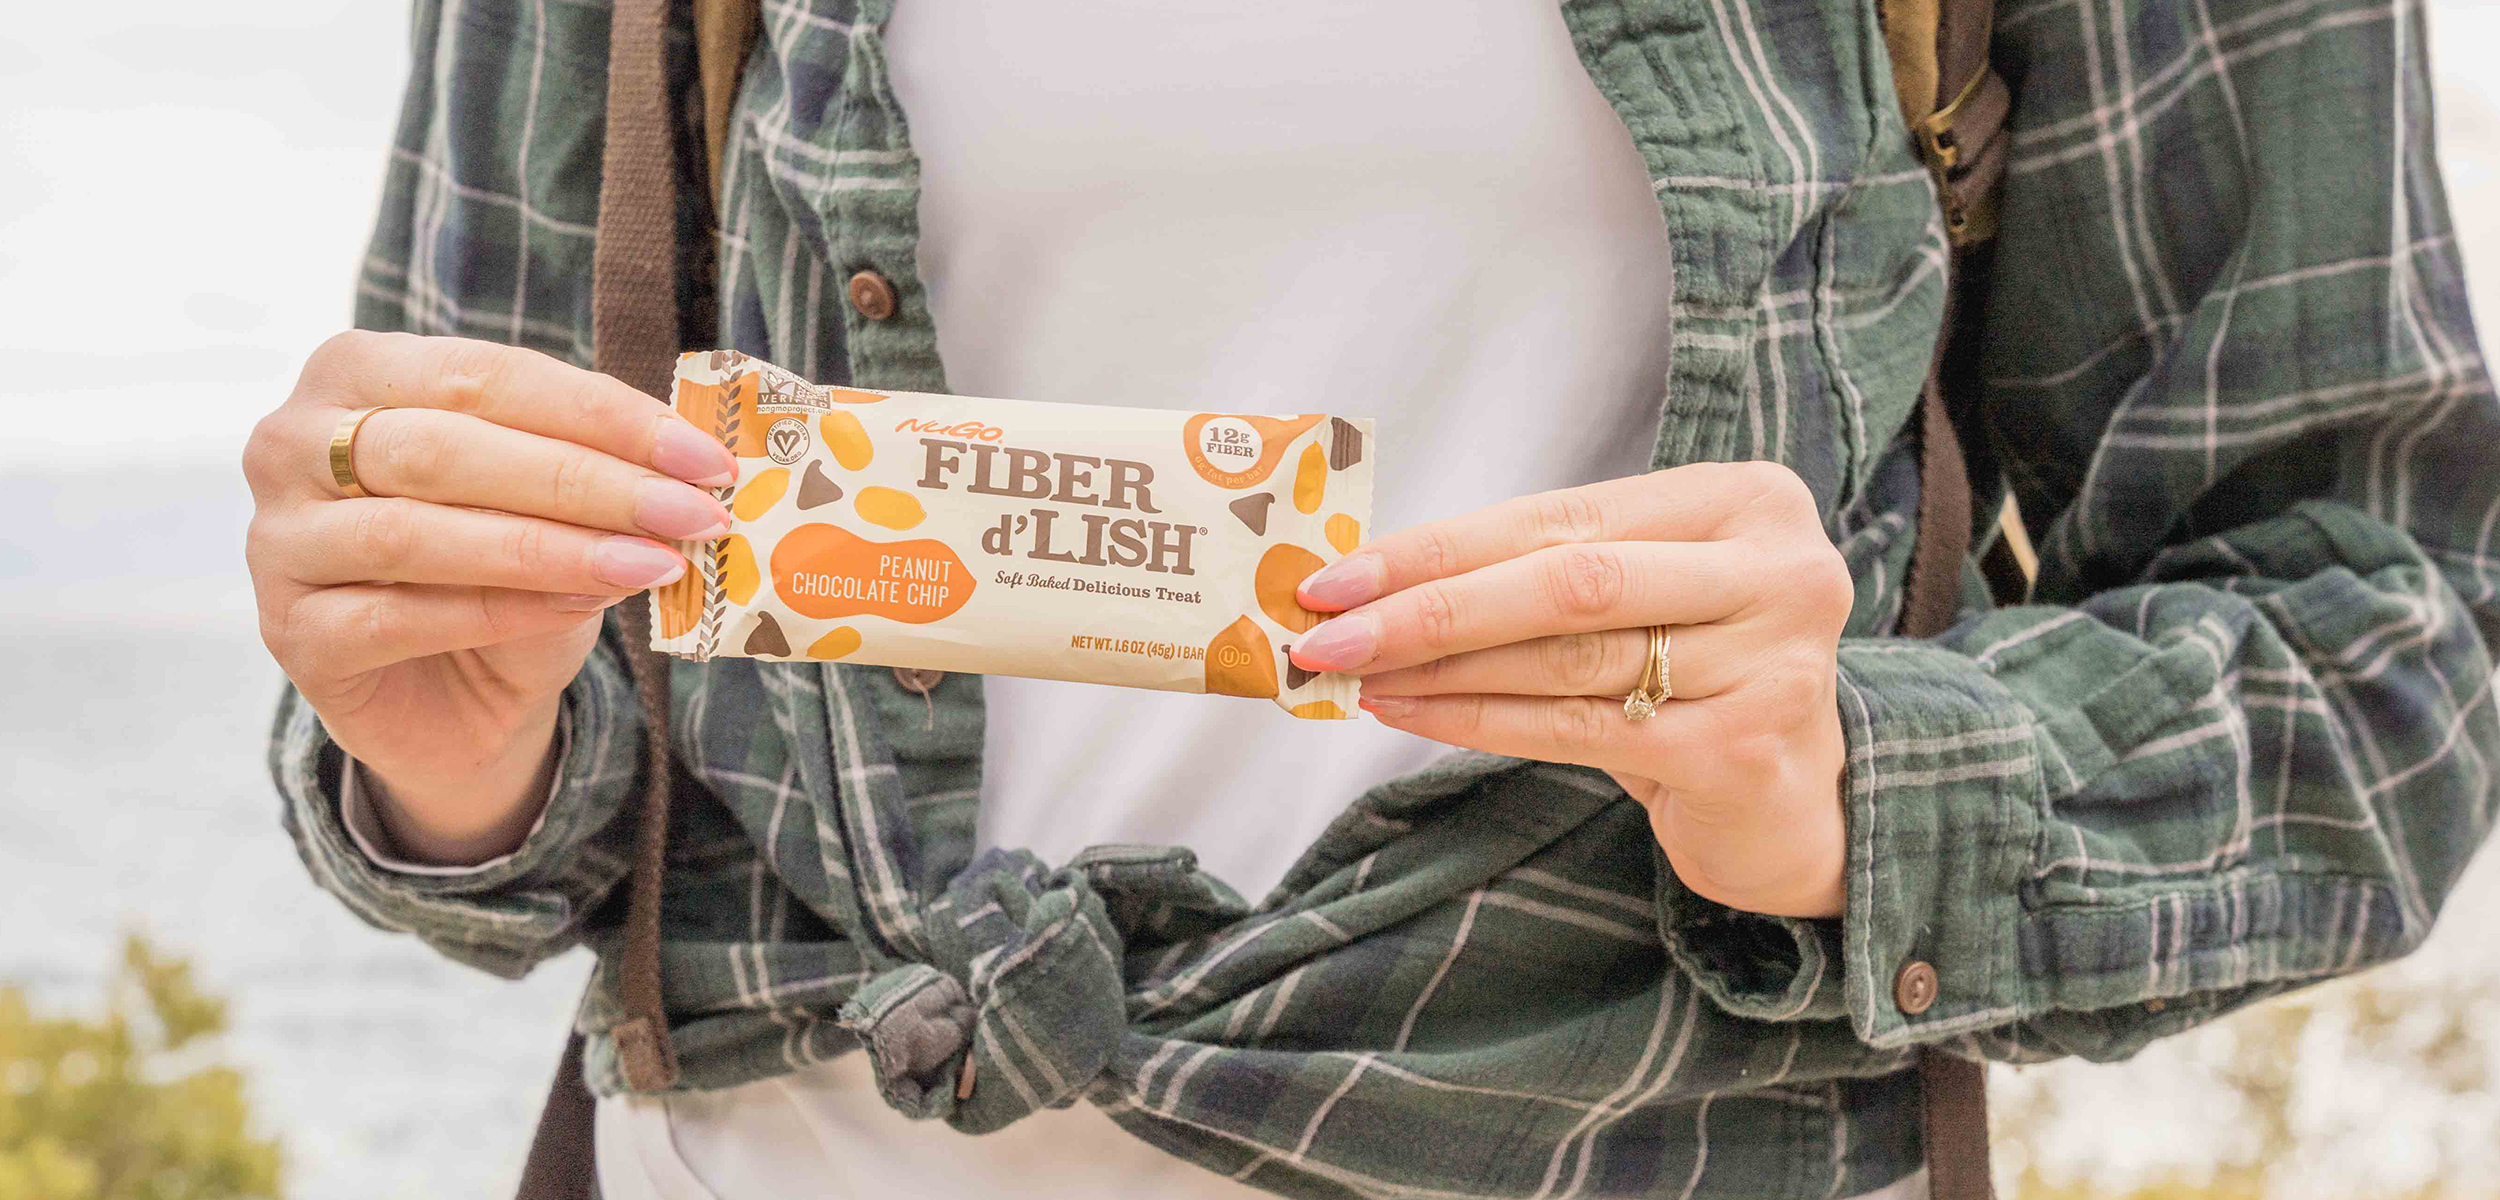 Woman, outisde, hold NuGo Fiber Peanut Chocolate Chip bar in front of body